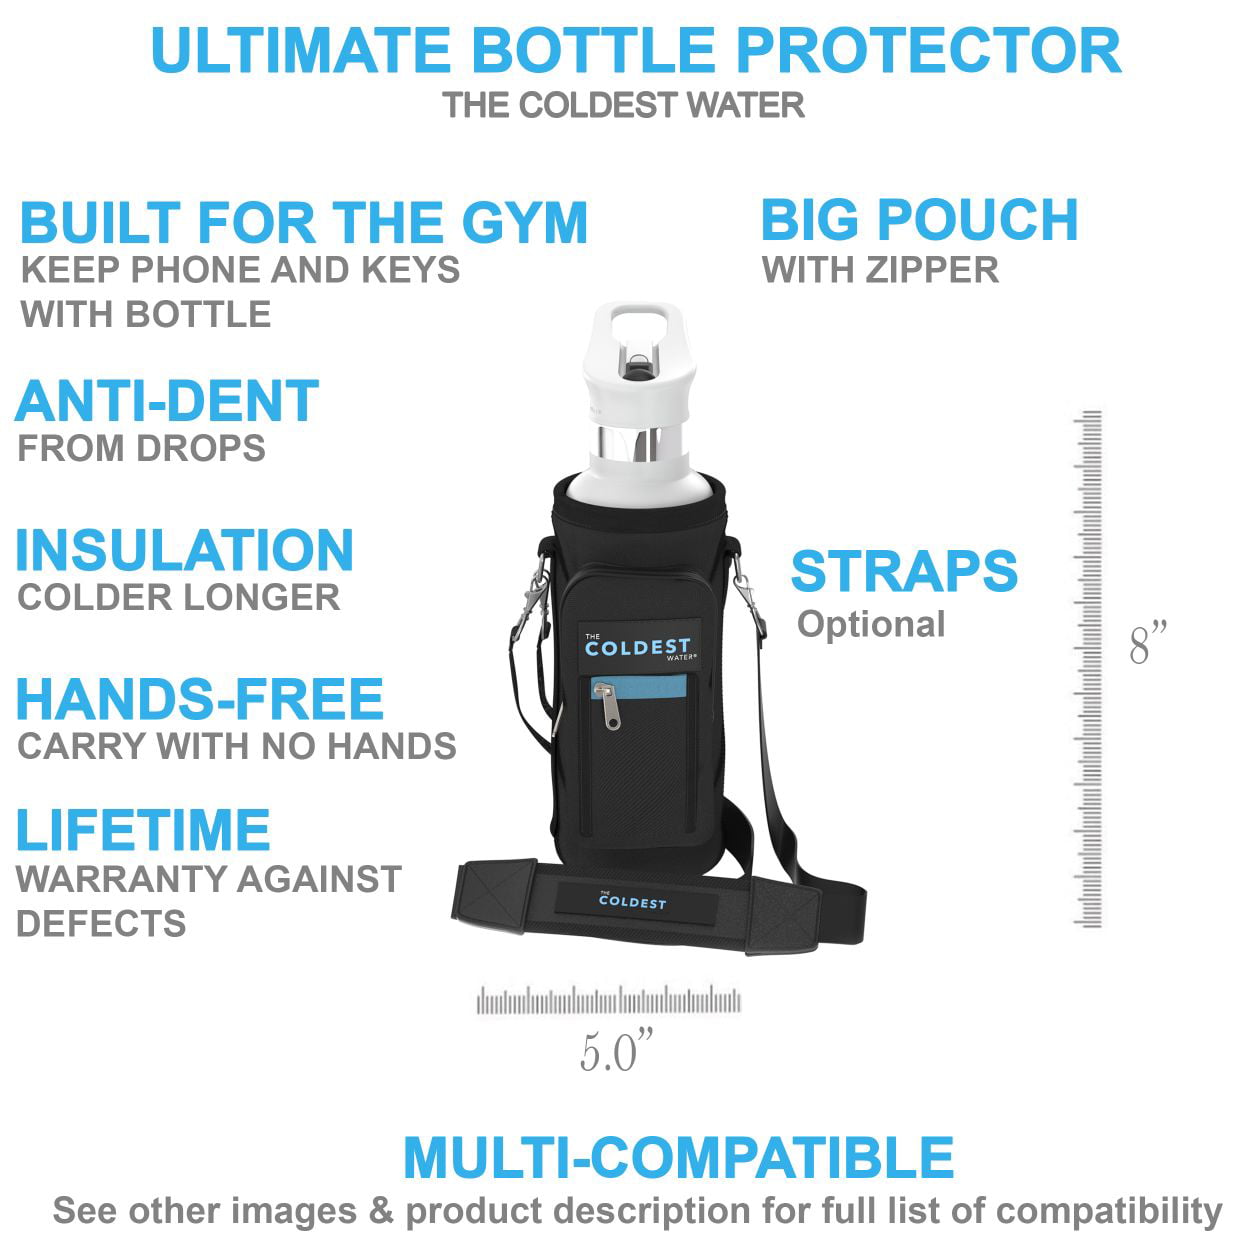 sunkey Water Bottle Carrier Bag Insulated Neoprene 32 oz Glass Water Bottle  Sleeve Holder Case Pouch Cover with Adjustable Shoulder Strap with Metal